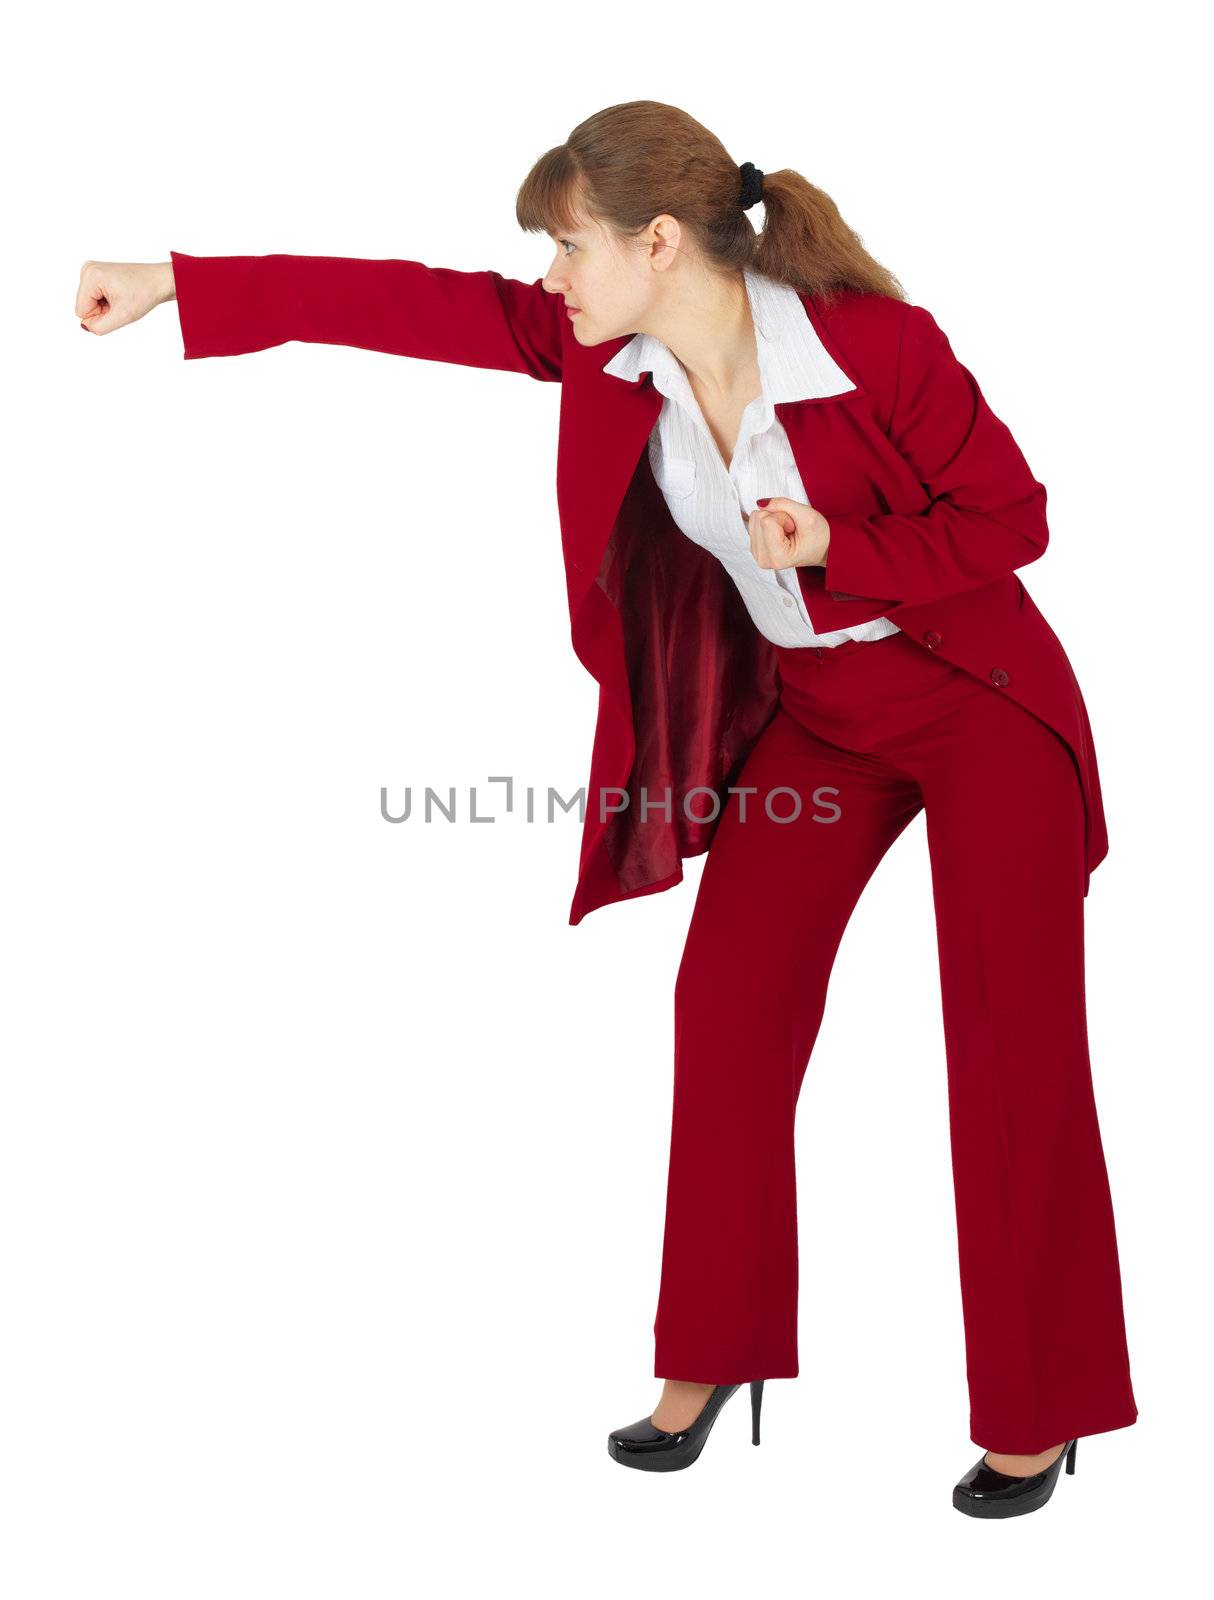 A woman in a red business suit breaks hand